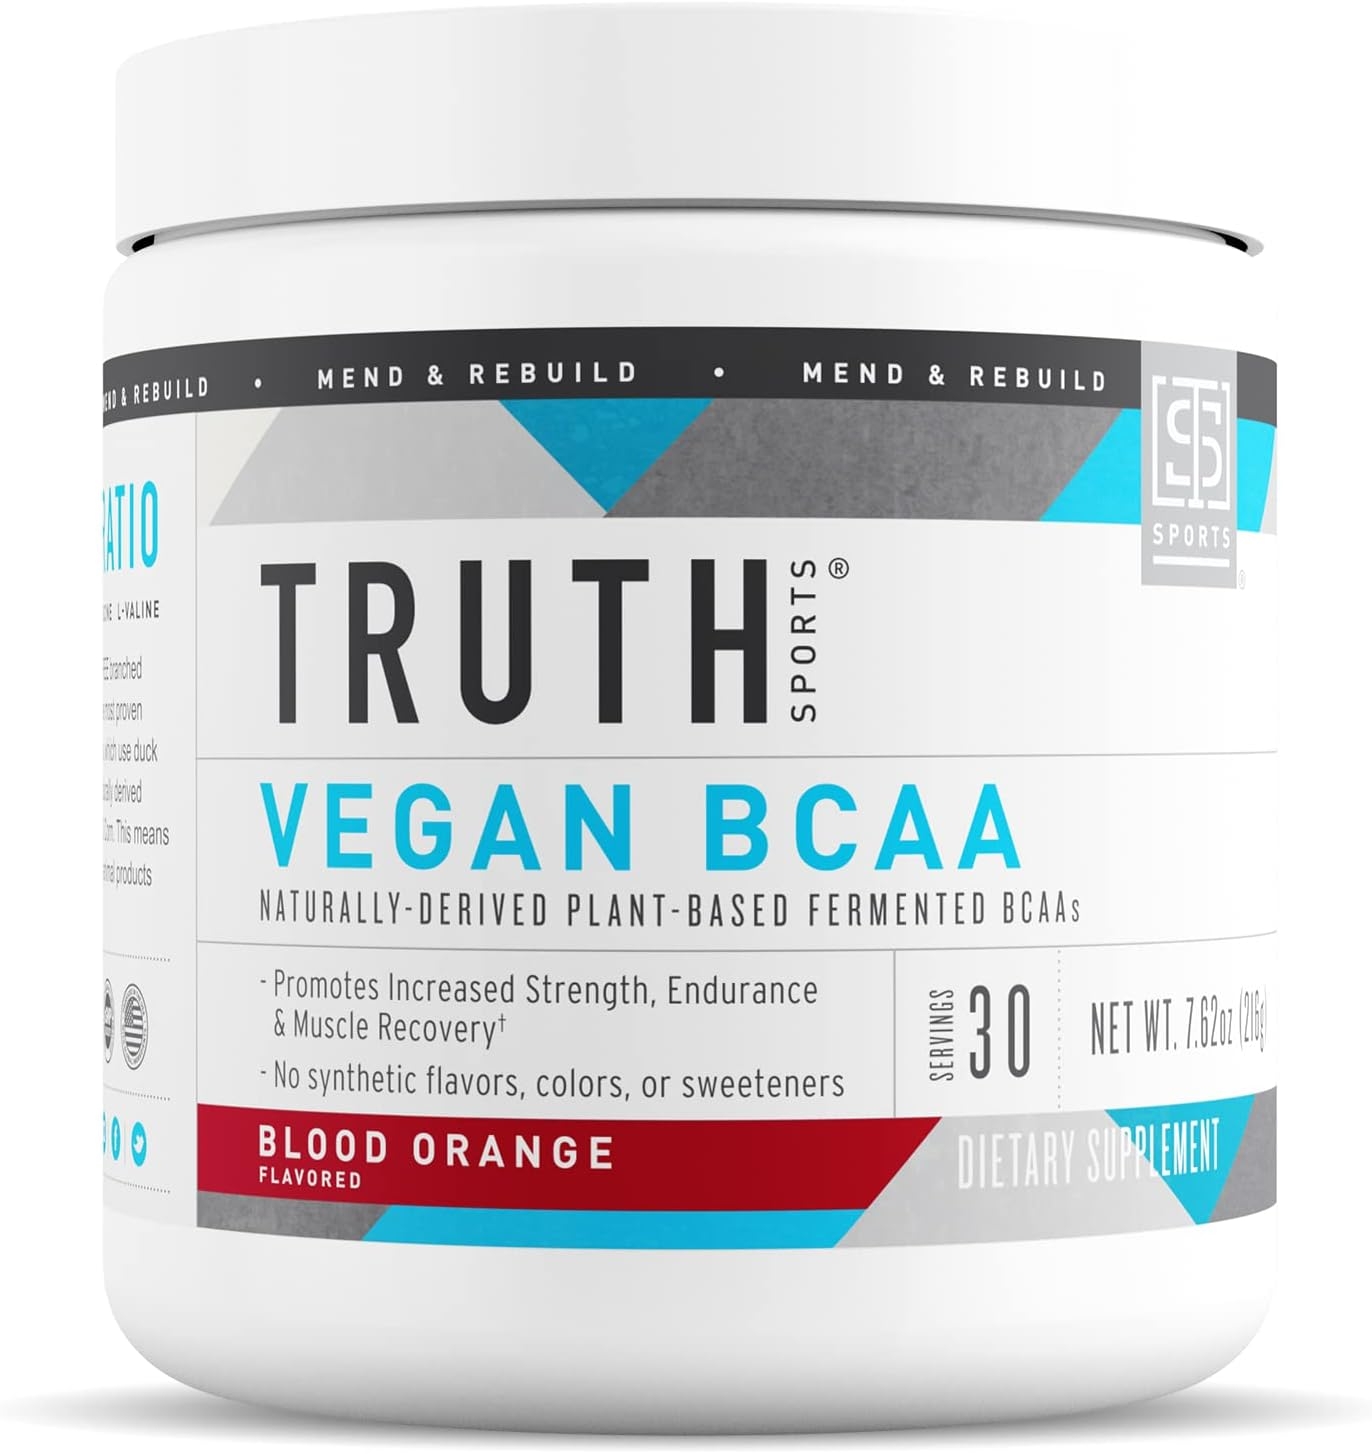 Truth Nutrition Fermented Vegan BCAA Powder- 2:1:1 Ratio All Natural Branched Chain Amino Acids for Energy, Muscle Building, Post Workout Recovery and Endurance (Blood Orange, 30 Servings)